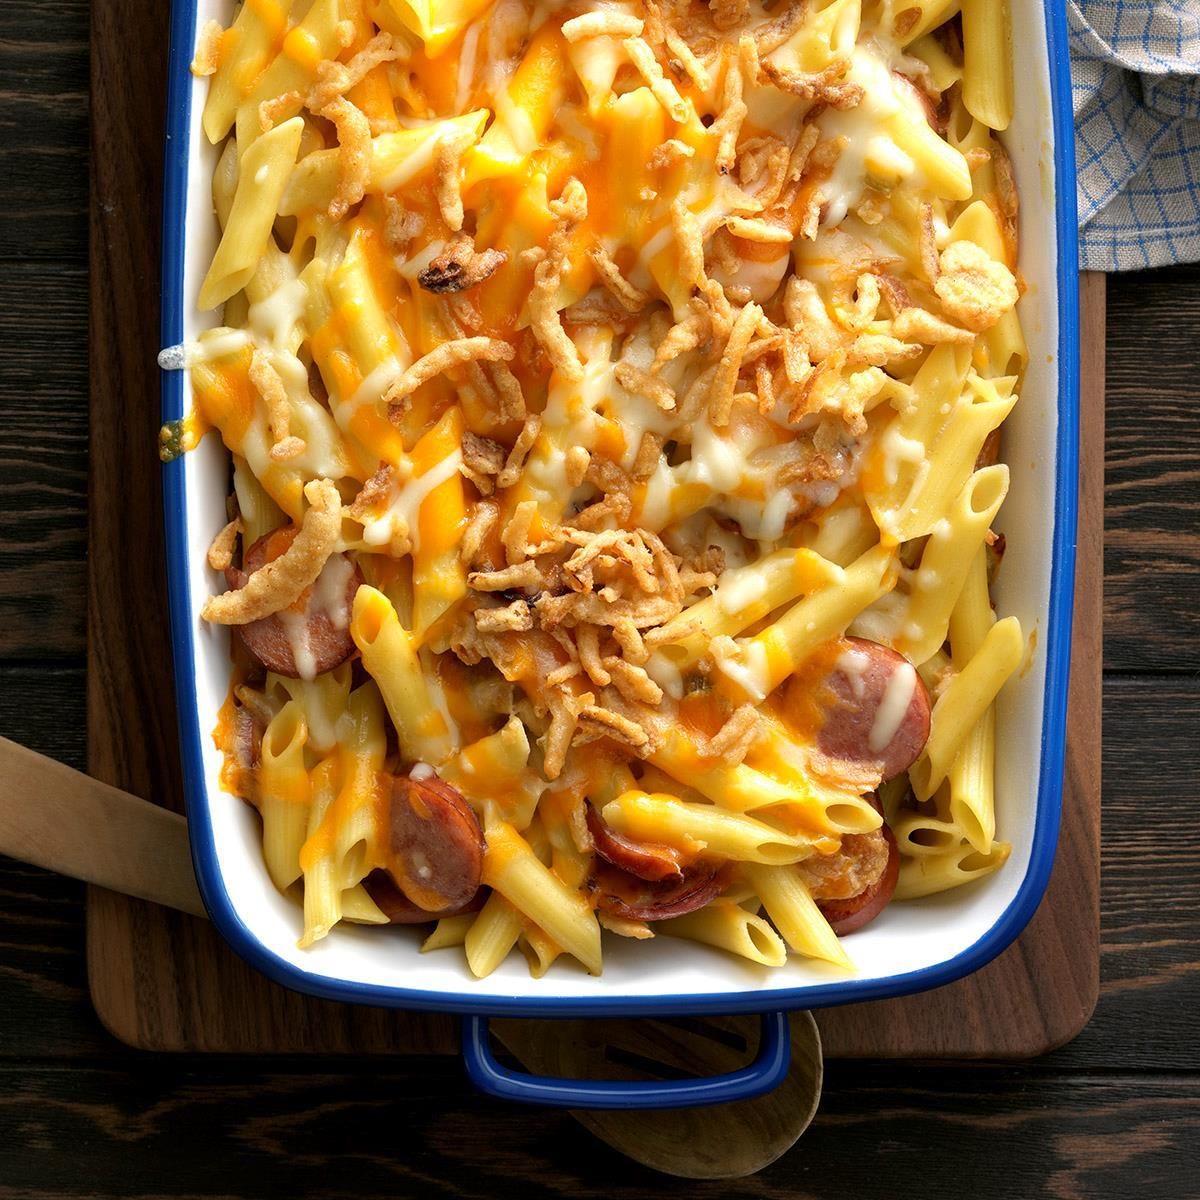 Penne And Smoked Sausage Casserole Exps Cplbz19 46353 C11 01 4b 13